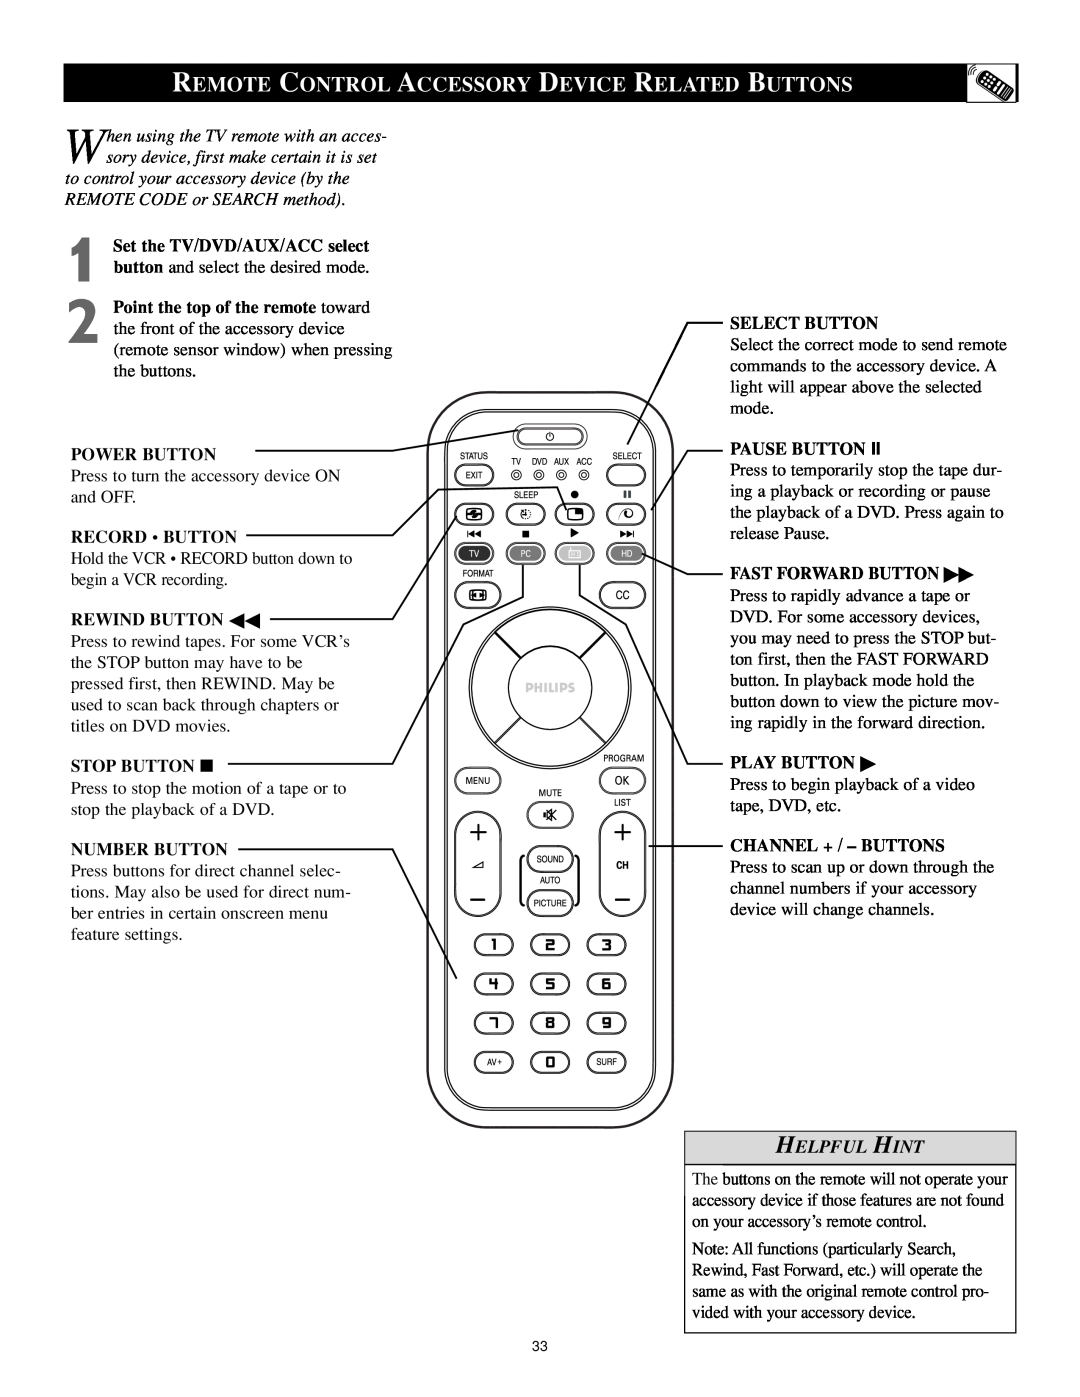 Philips 17PF9946/37 user manual Remote Control Accessory Device Related Buttons, Helpful Hint 